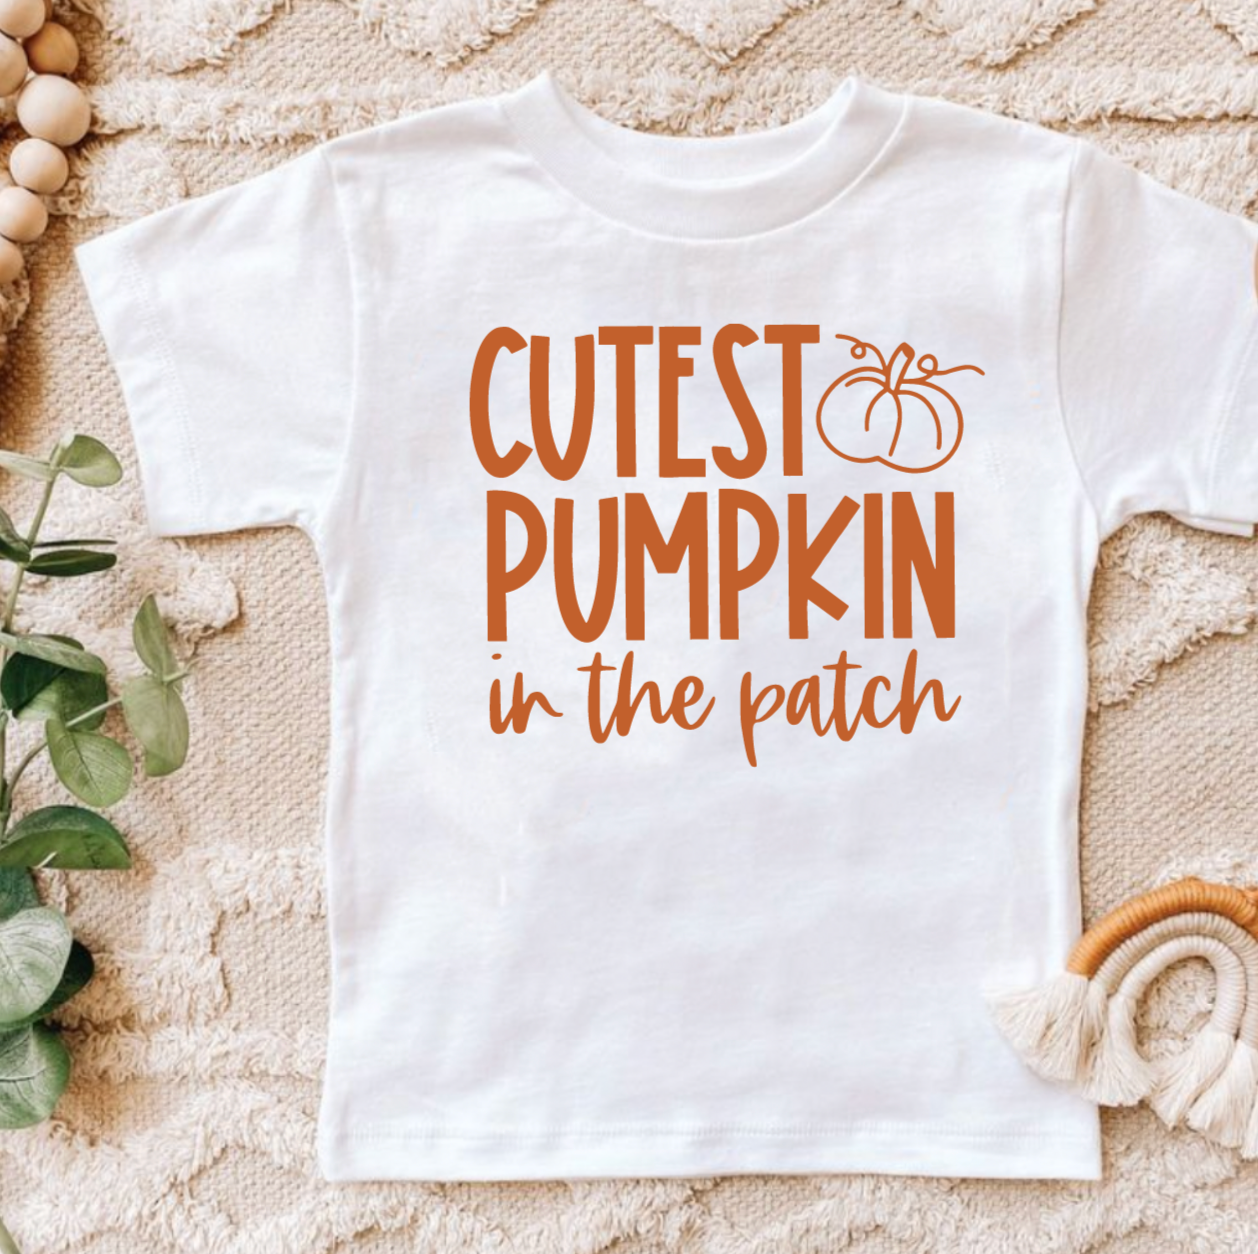 Cutest Pumpkin In the Patch White and Burnt Orange Shirt for Toddlers